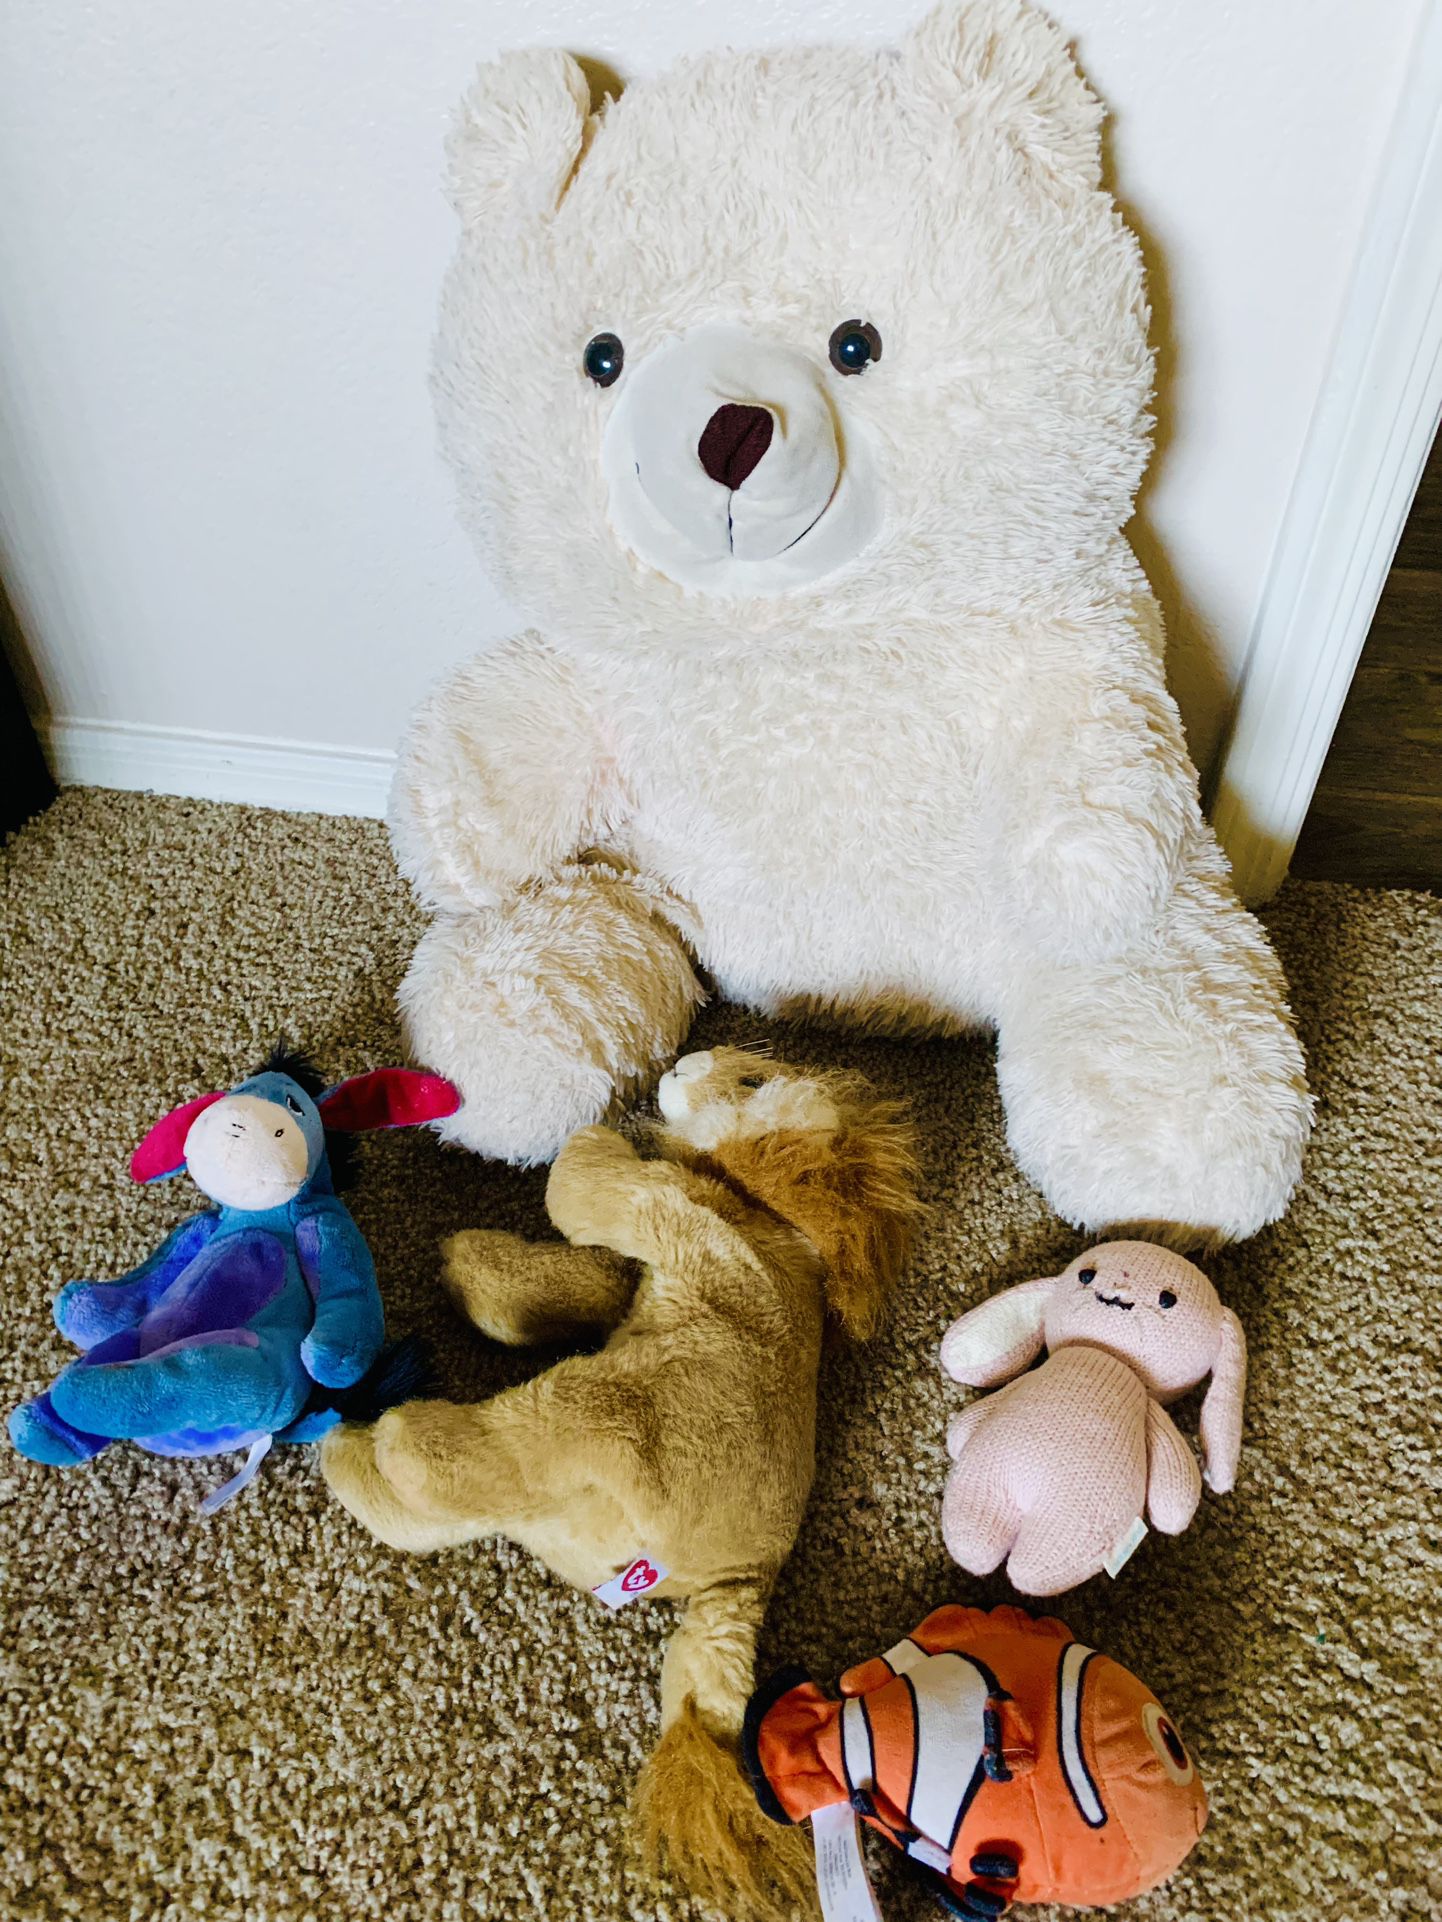 Stuffed Animals,huge Teddy Bears,all 5 For $5 Great Conditions 